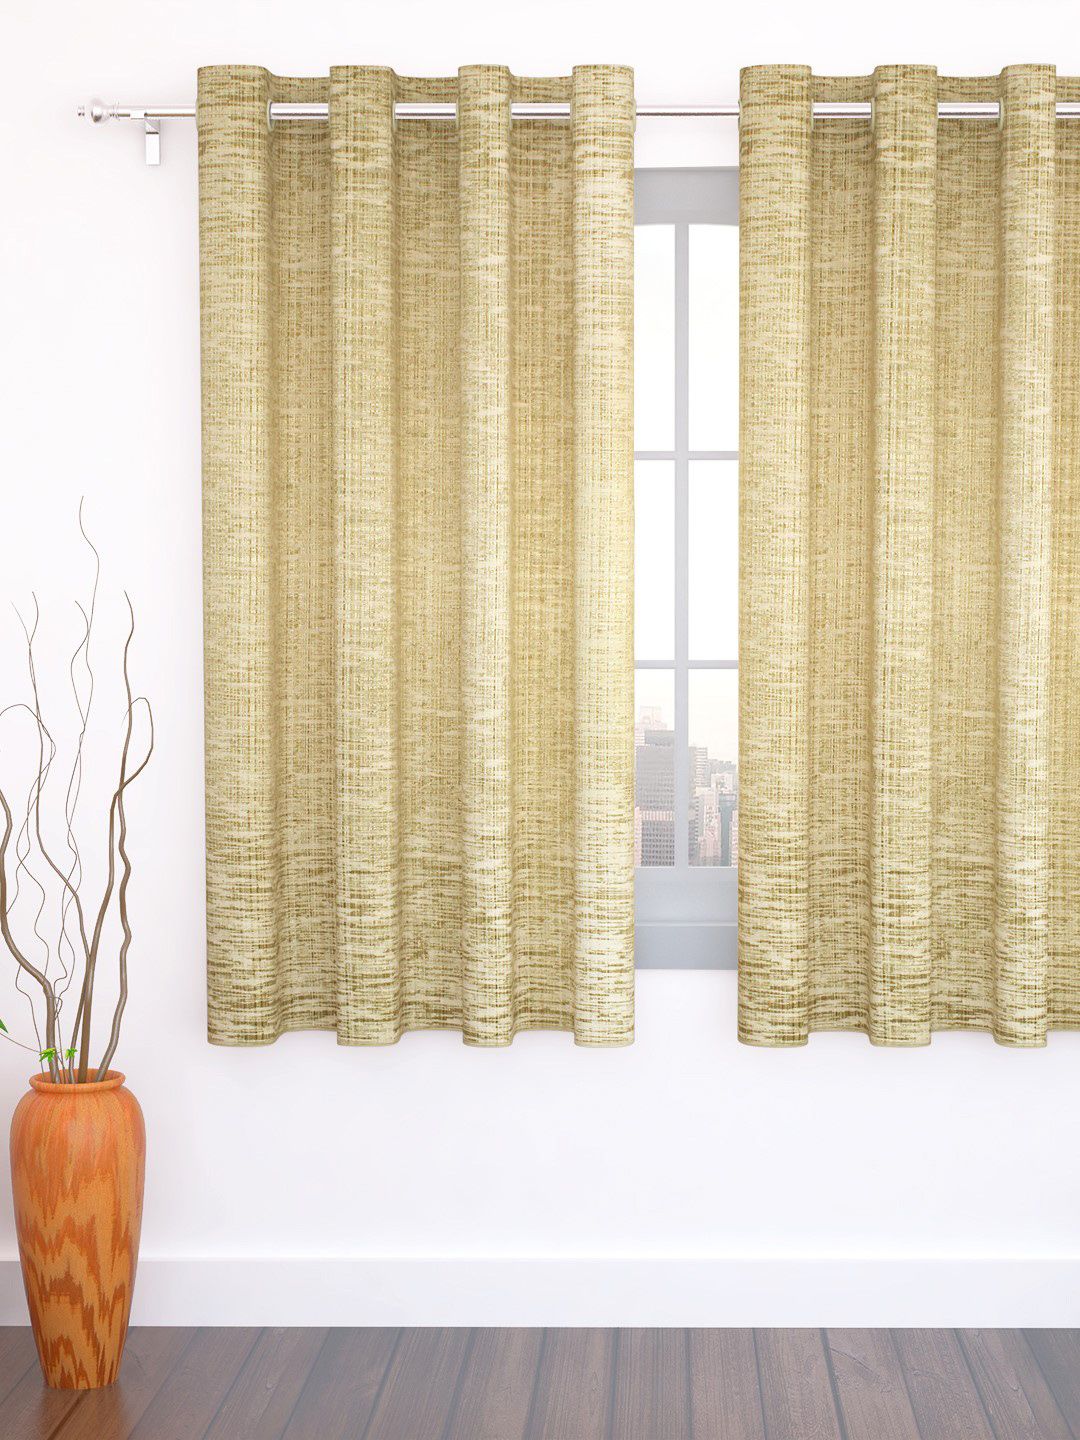 Story@home Beige Set of Single Jacquard Textured Window Curtains Price in India